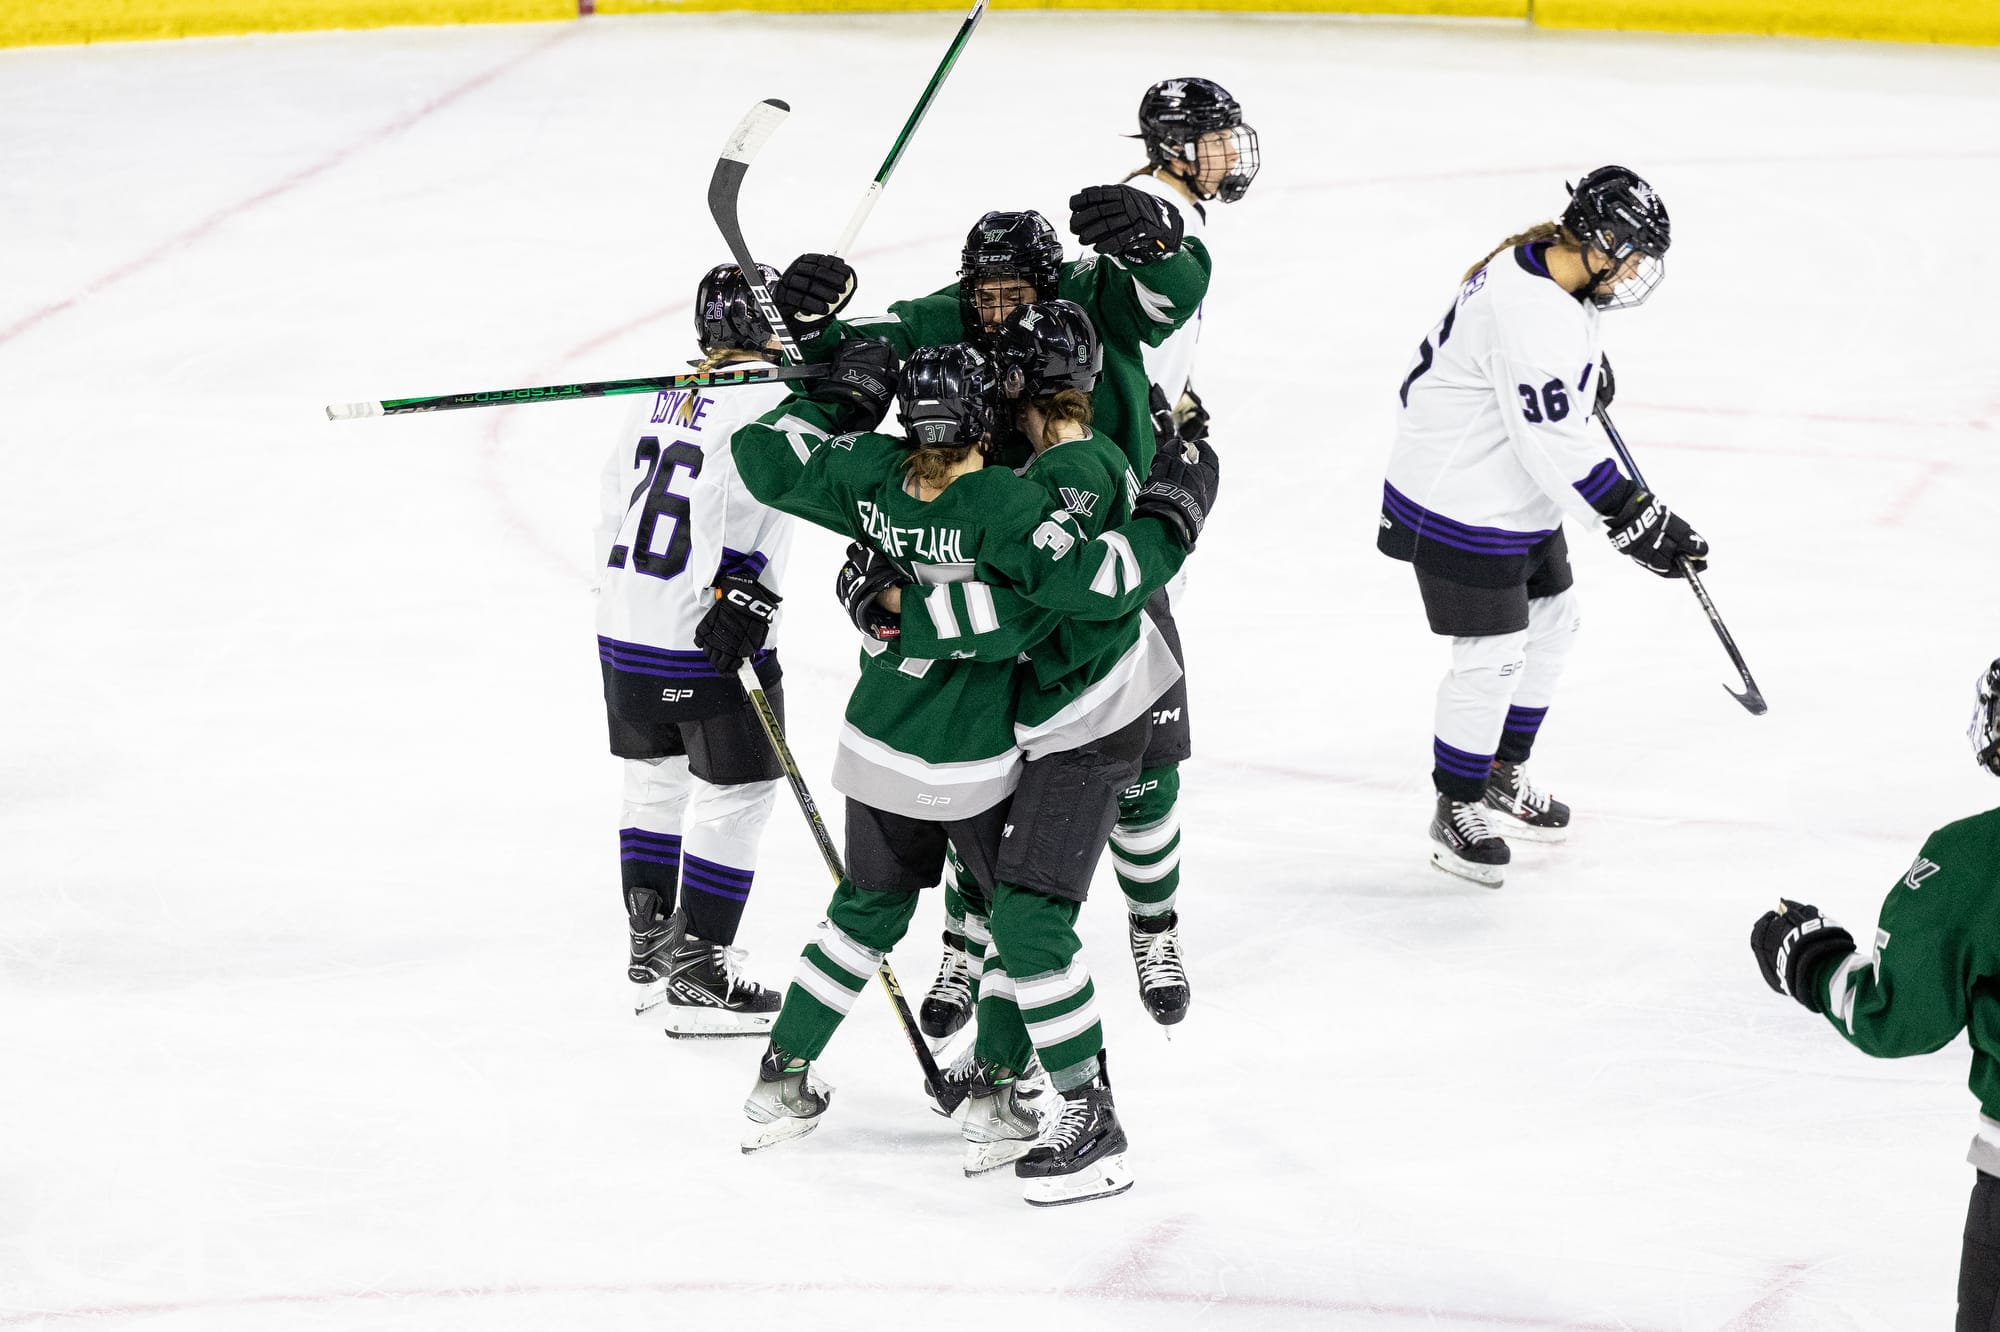 Members of PWHL Boston celebrate Theresa Schafzahl's goal in their green home uniforms.